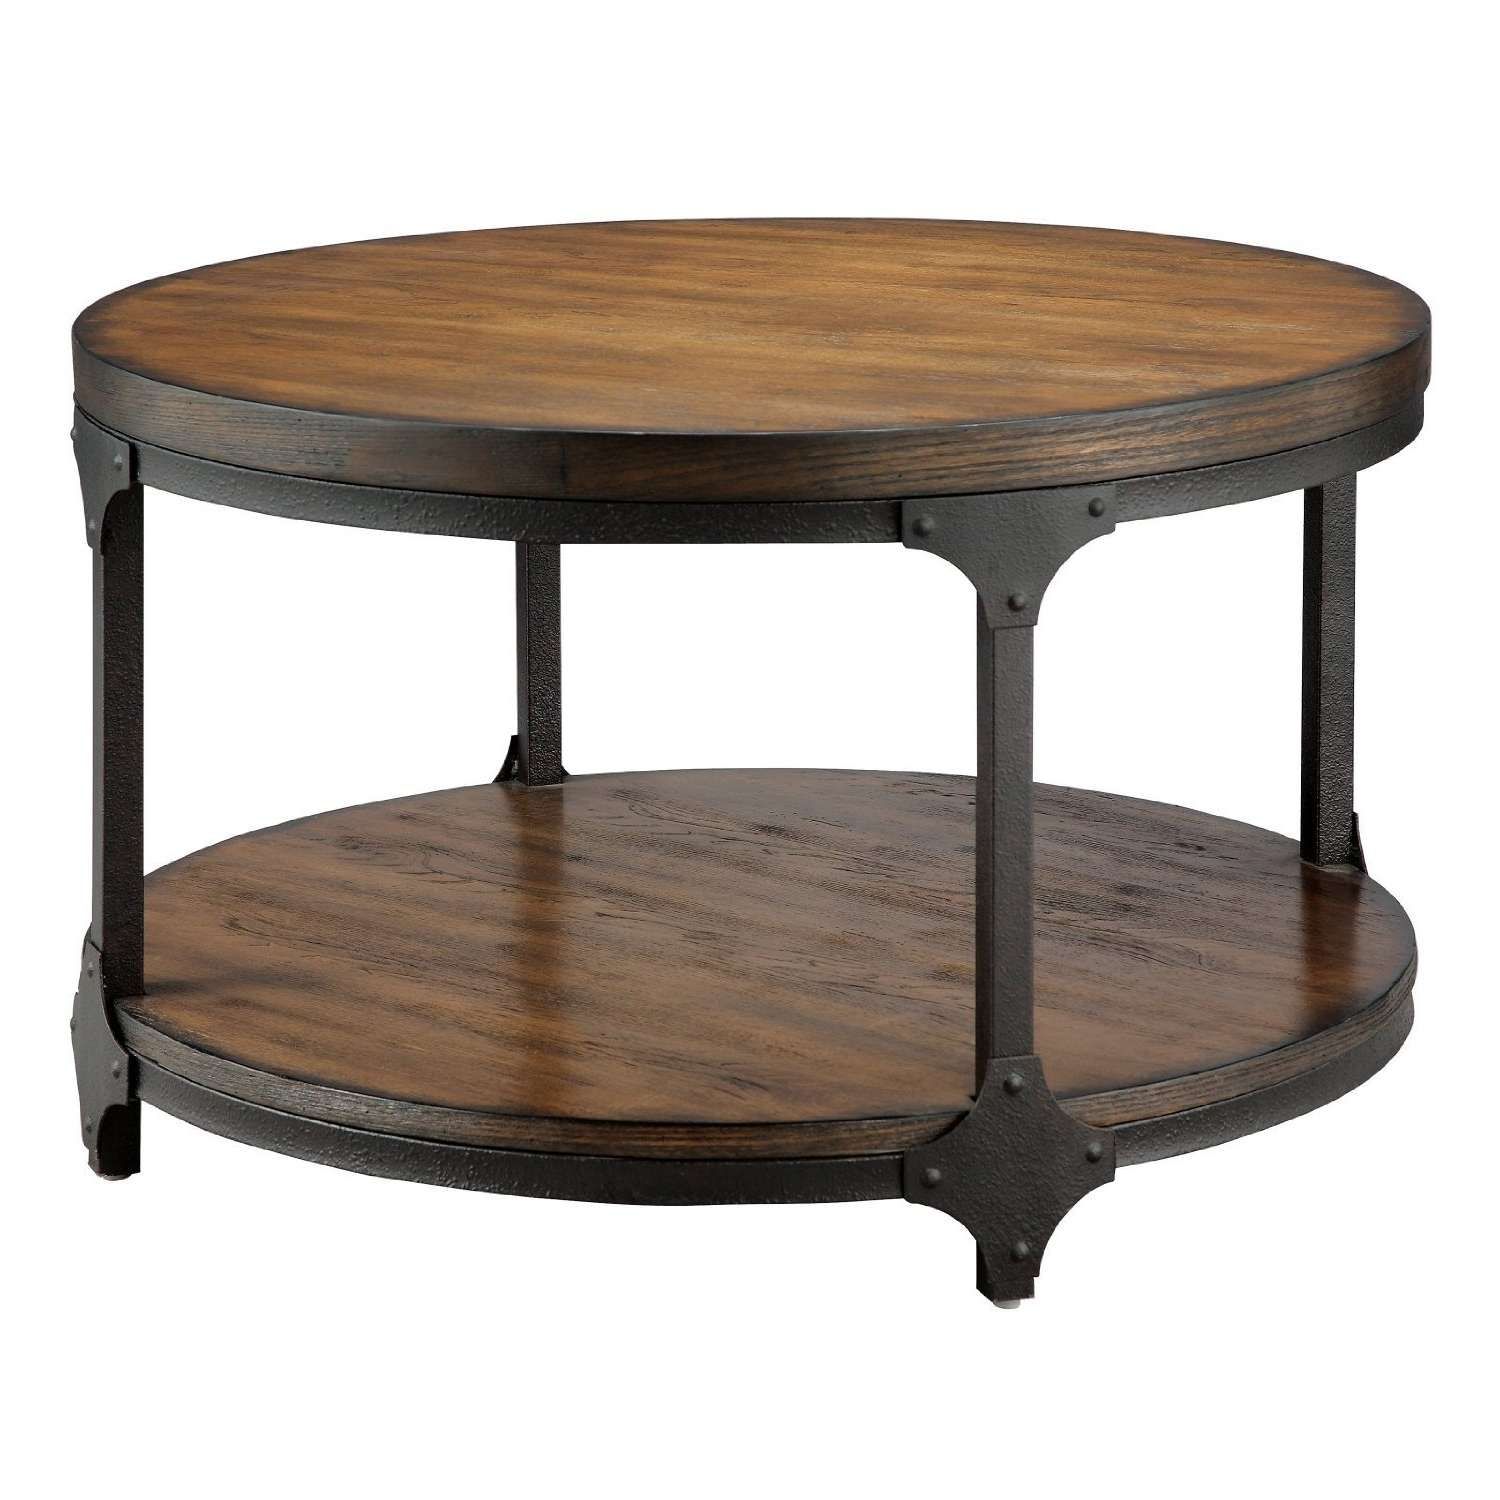 Most Recent Antique Rustic Coffee Tables In Coffee Tables : Beautiful Furniture Old And Vintage Round Coffee (View 5 of 20)